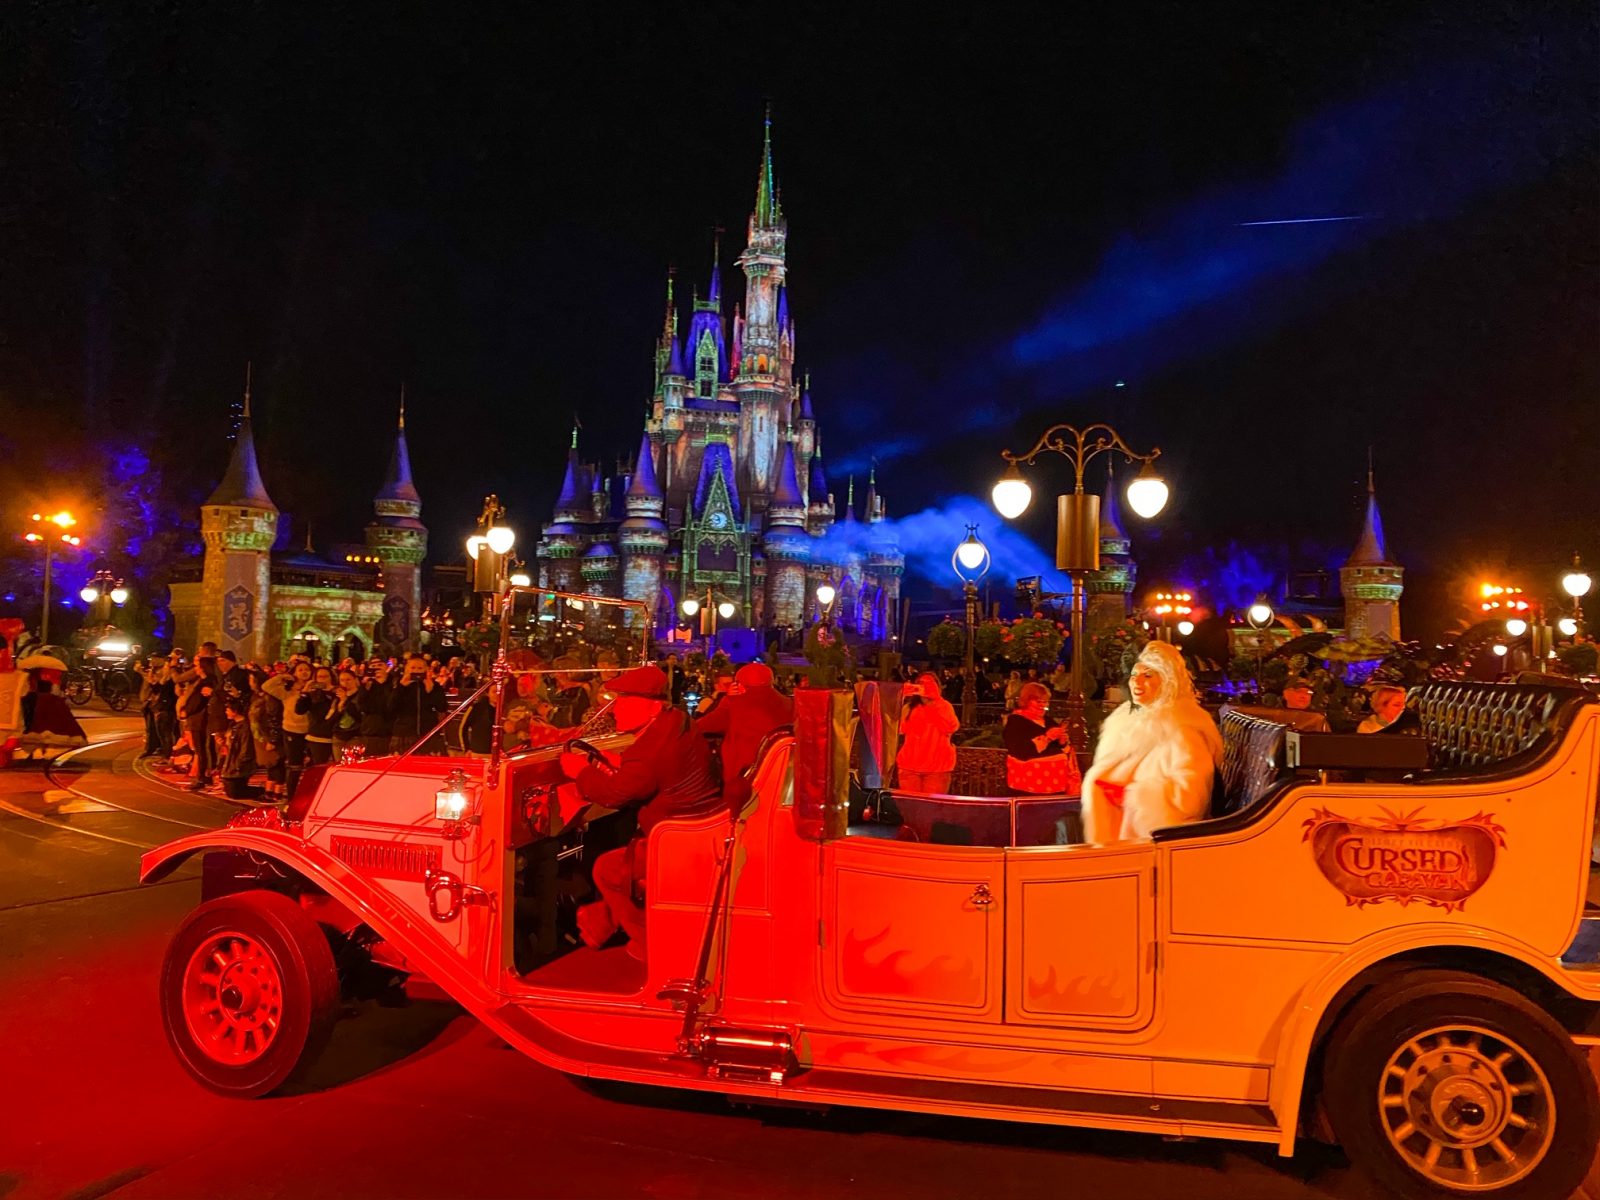 Cruella in the cursed caravan at Villains after hours